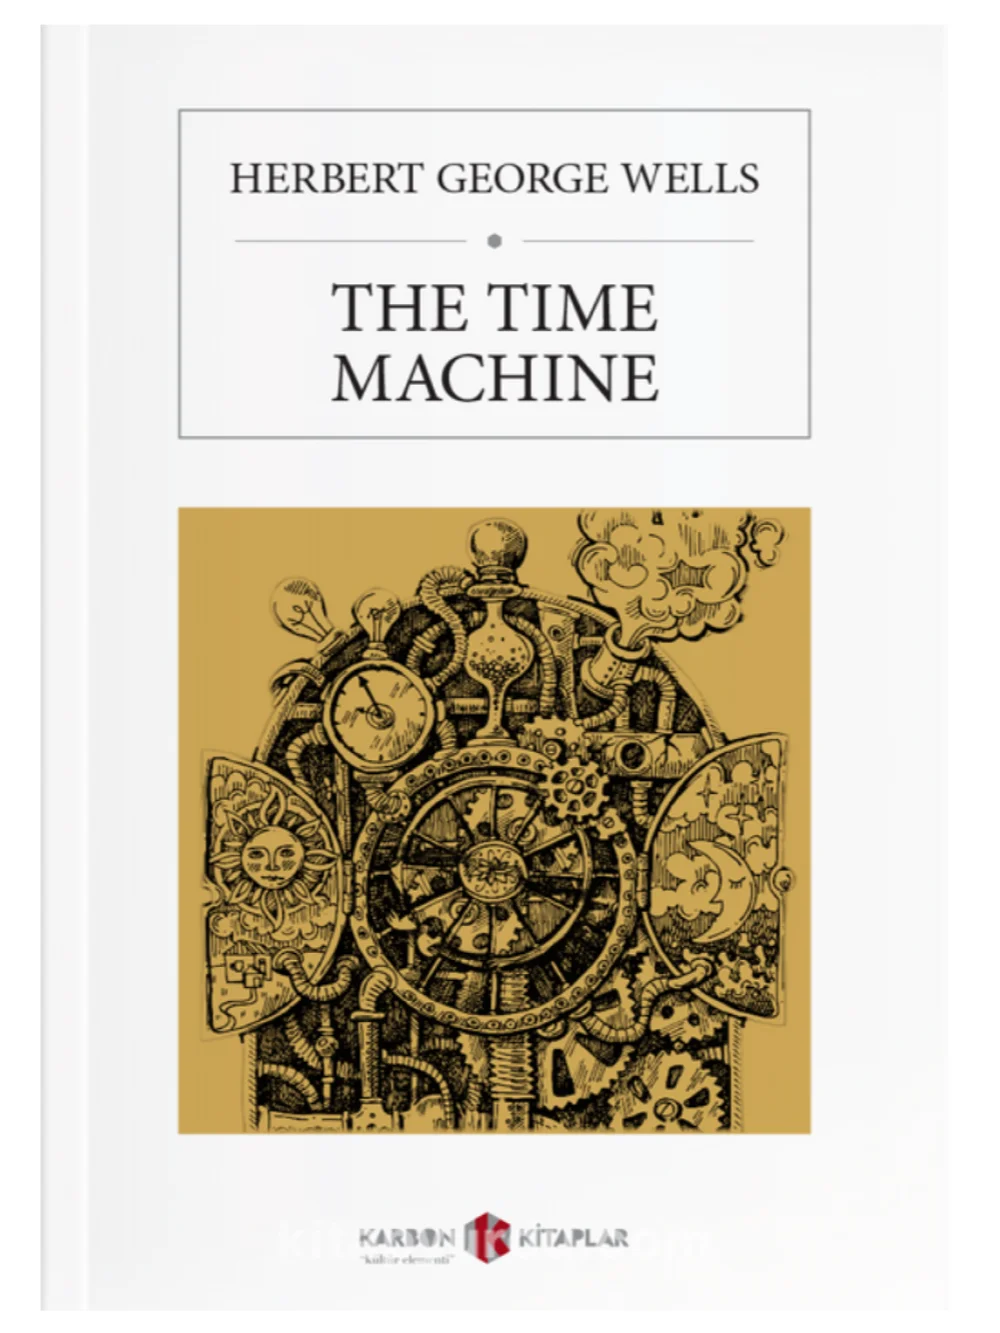 

The Time Machine Herbert George Well world literature classics English book 104 pages nice gift for friends and English learners